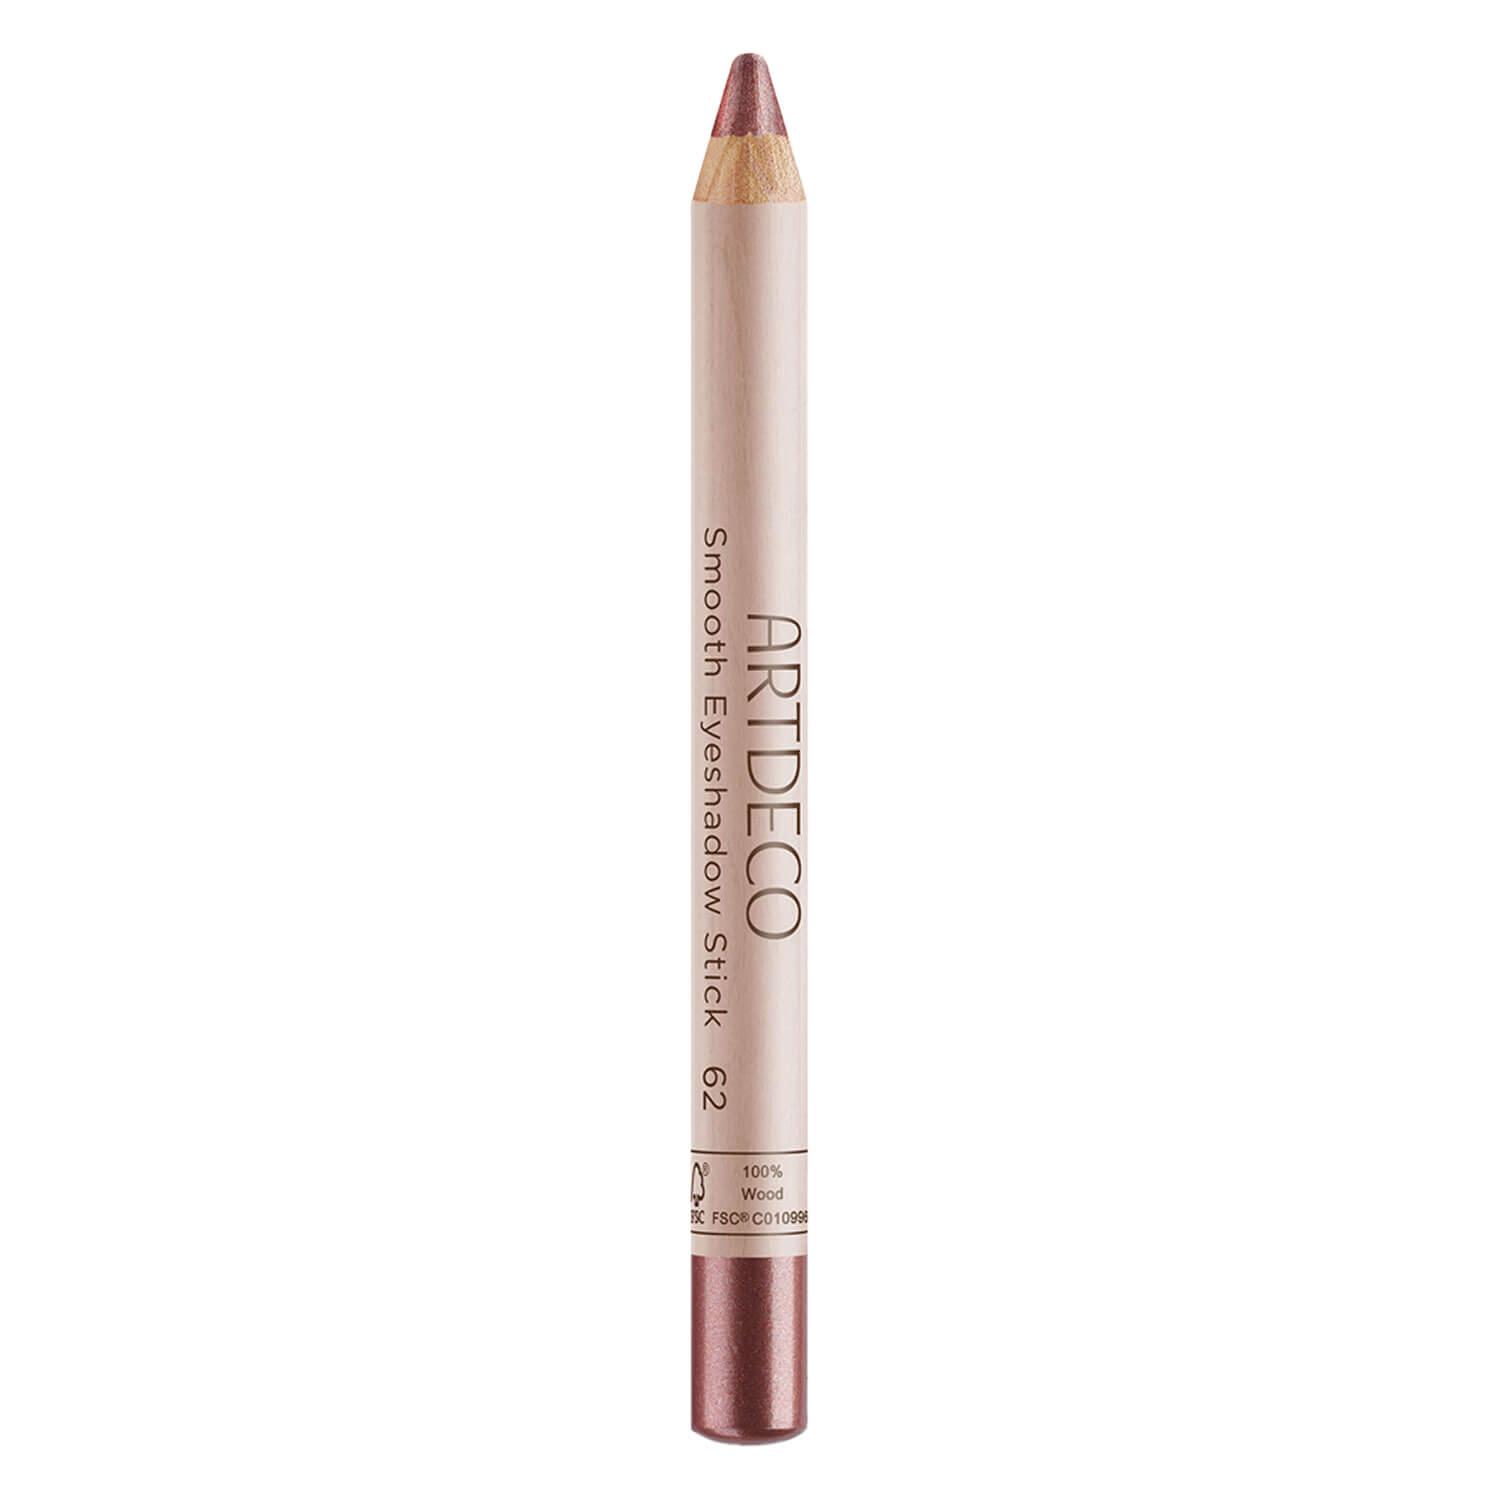 green COUTURE - Smooth Eyeshadow Stick Chocolate Brown 62